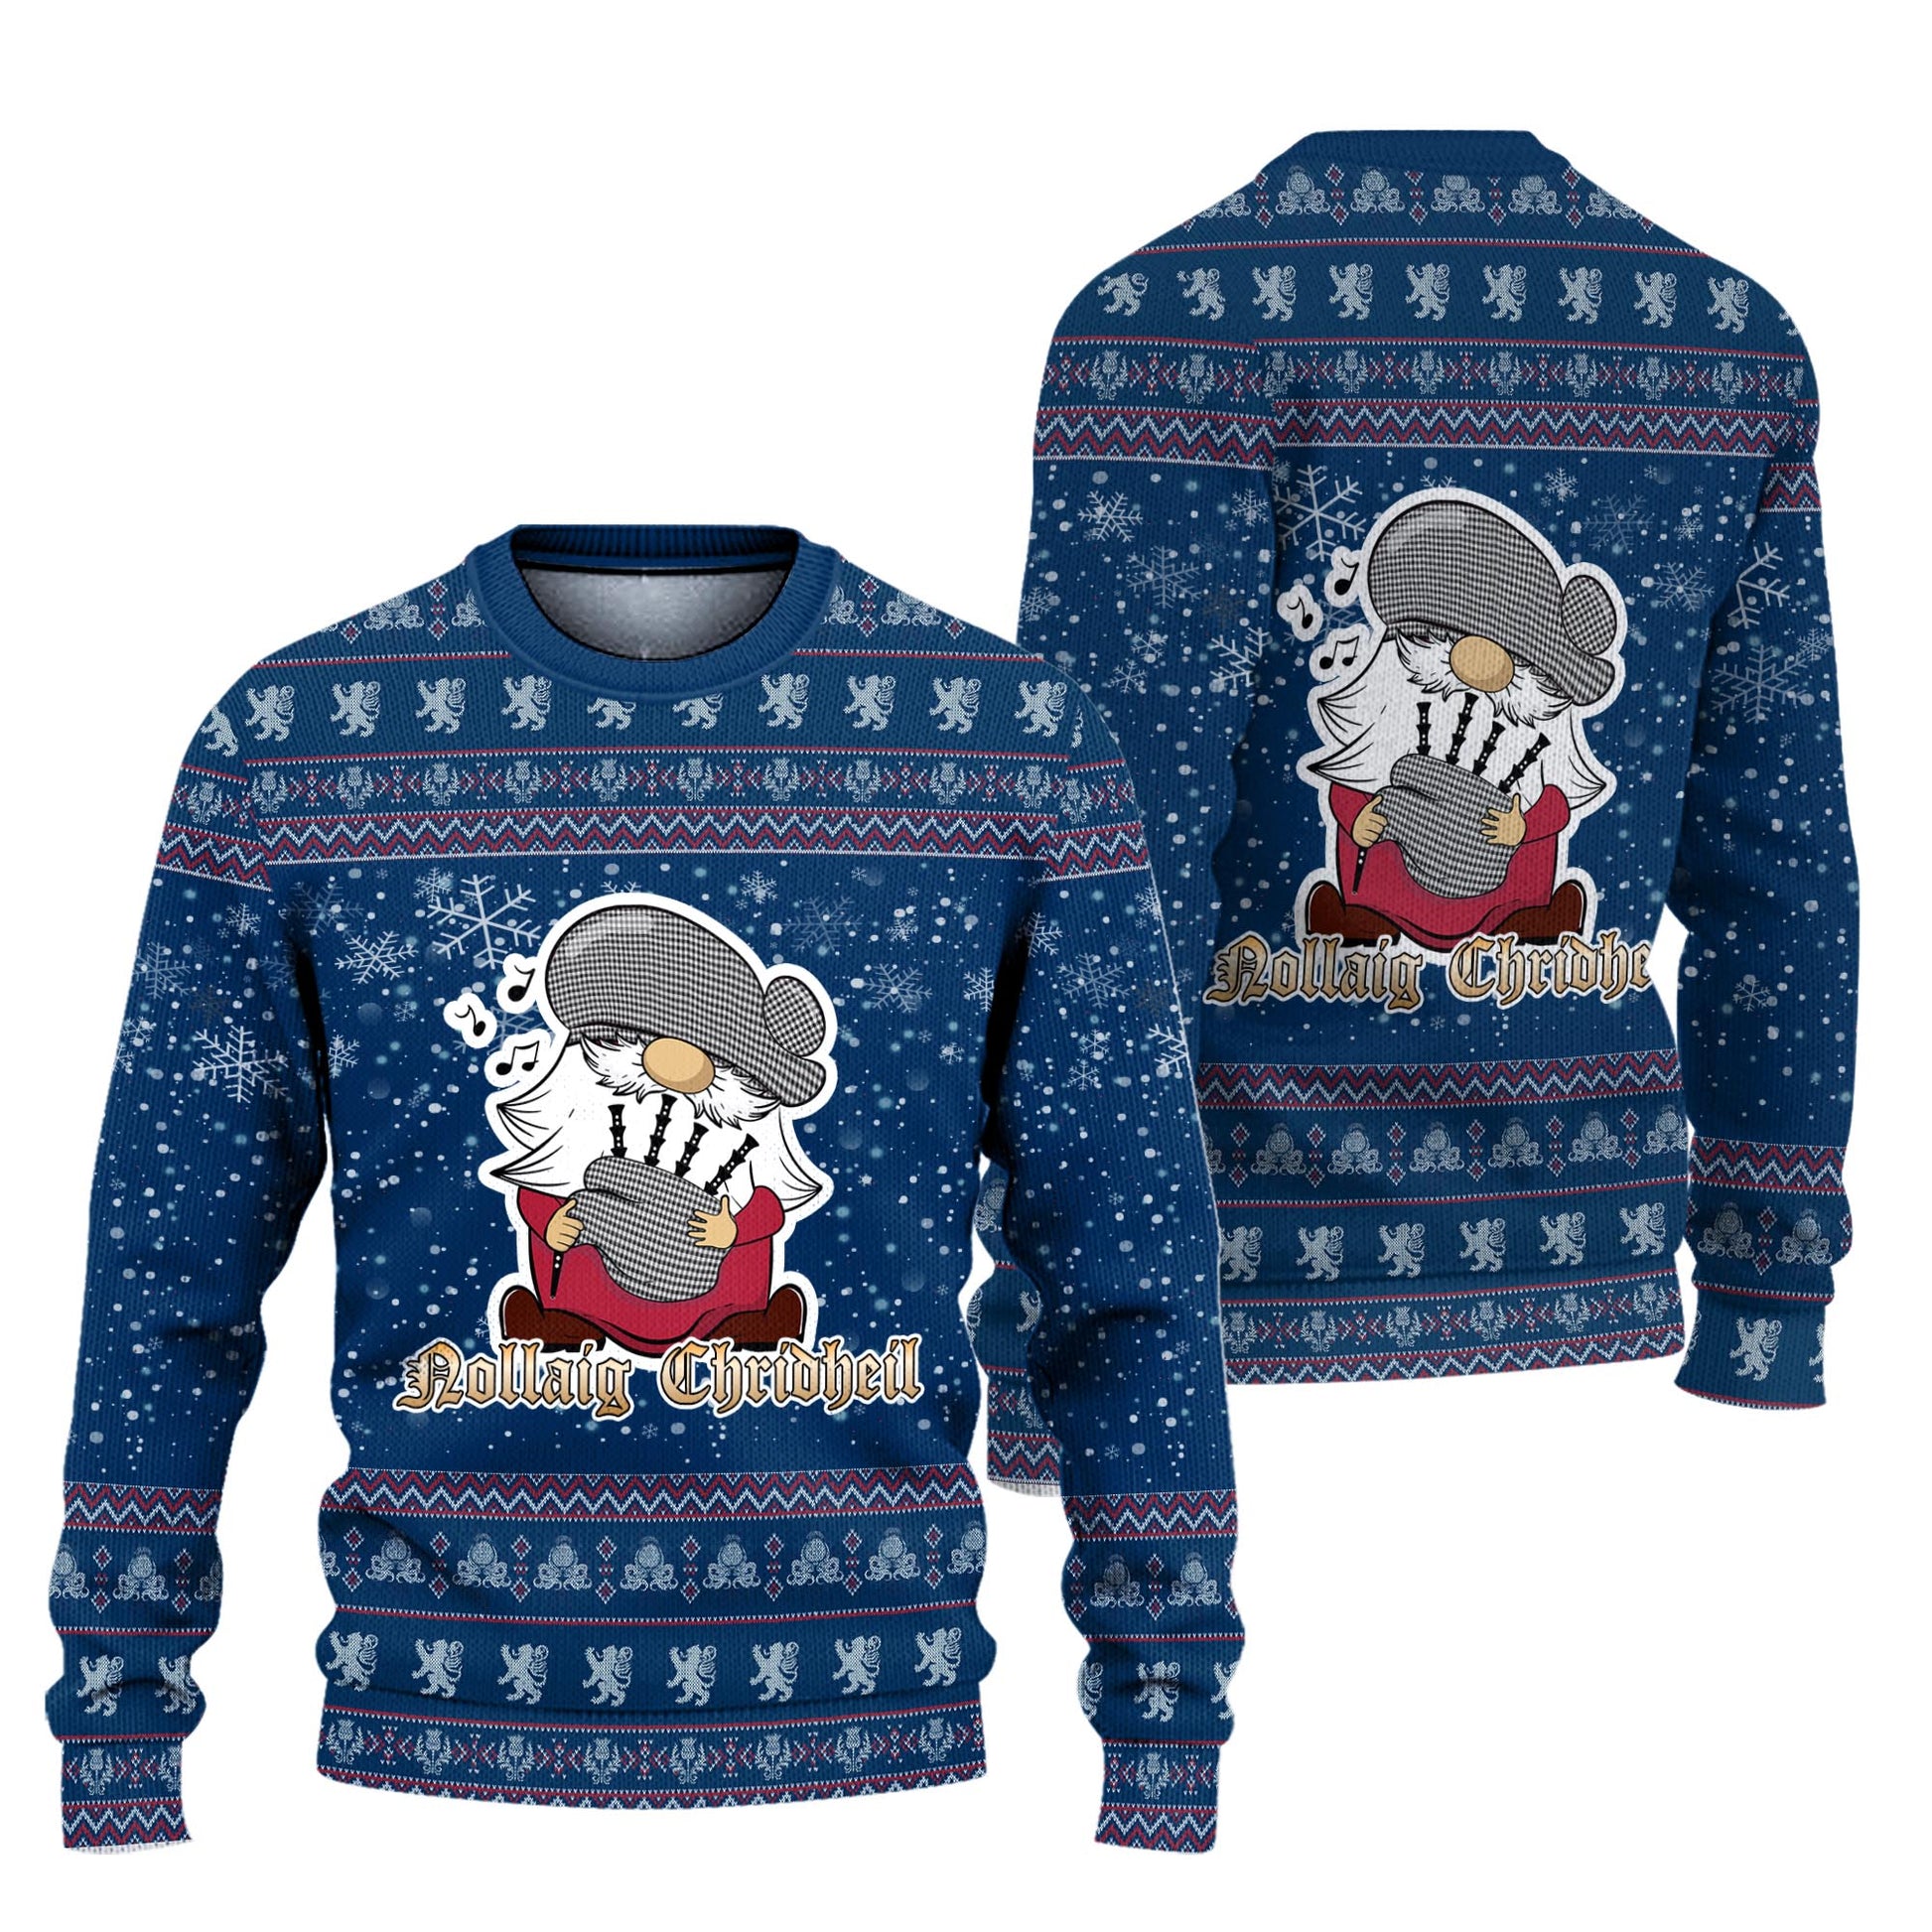 Shepherd Clan Christmas Family Knitted Sweater with Funny Gnome Playing Bagpipes Unisex Blue - Tartanvibesclothing